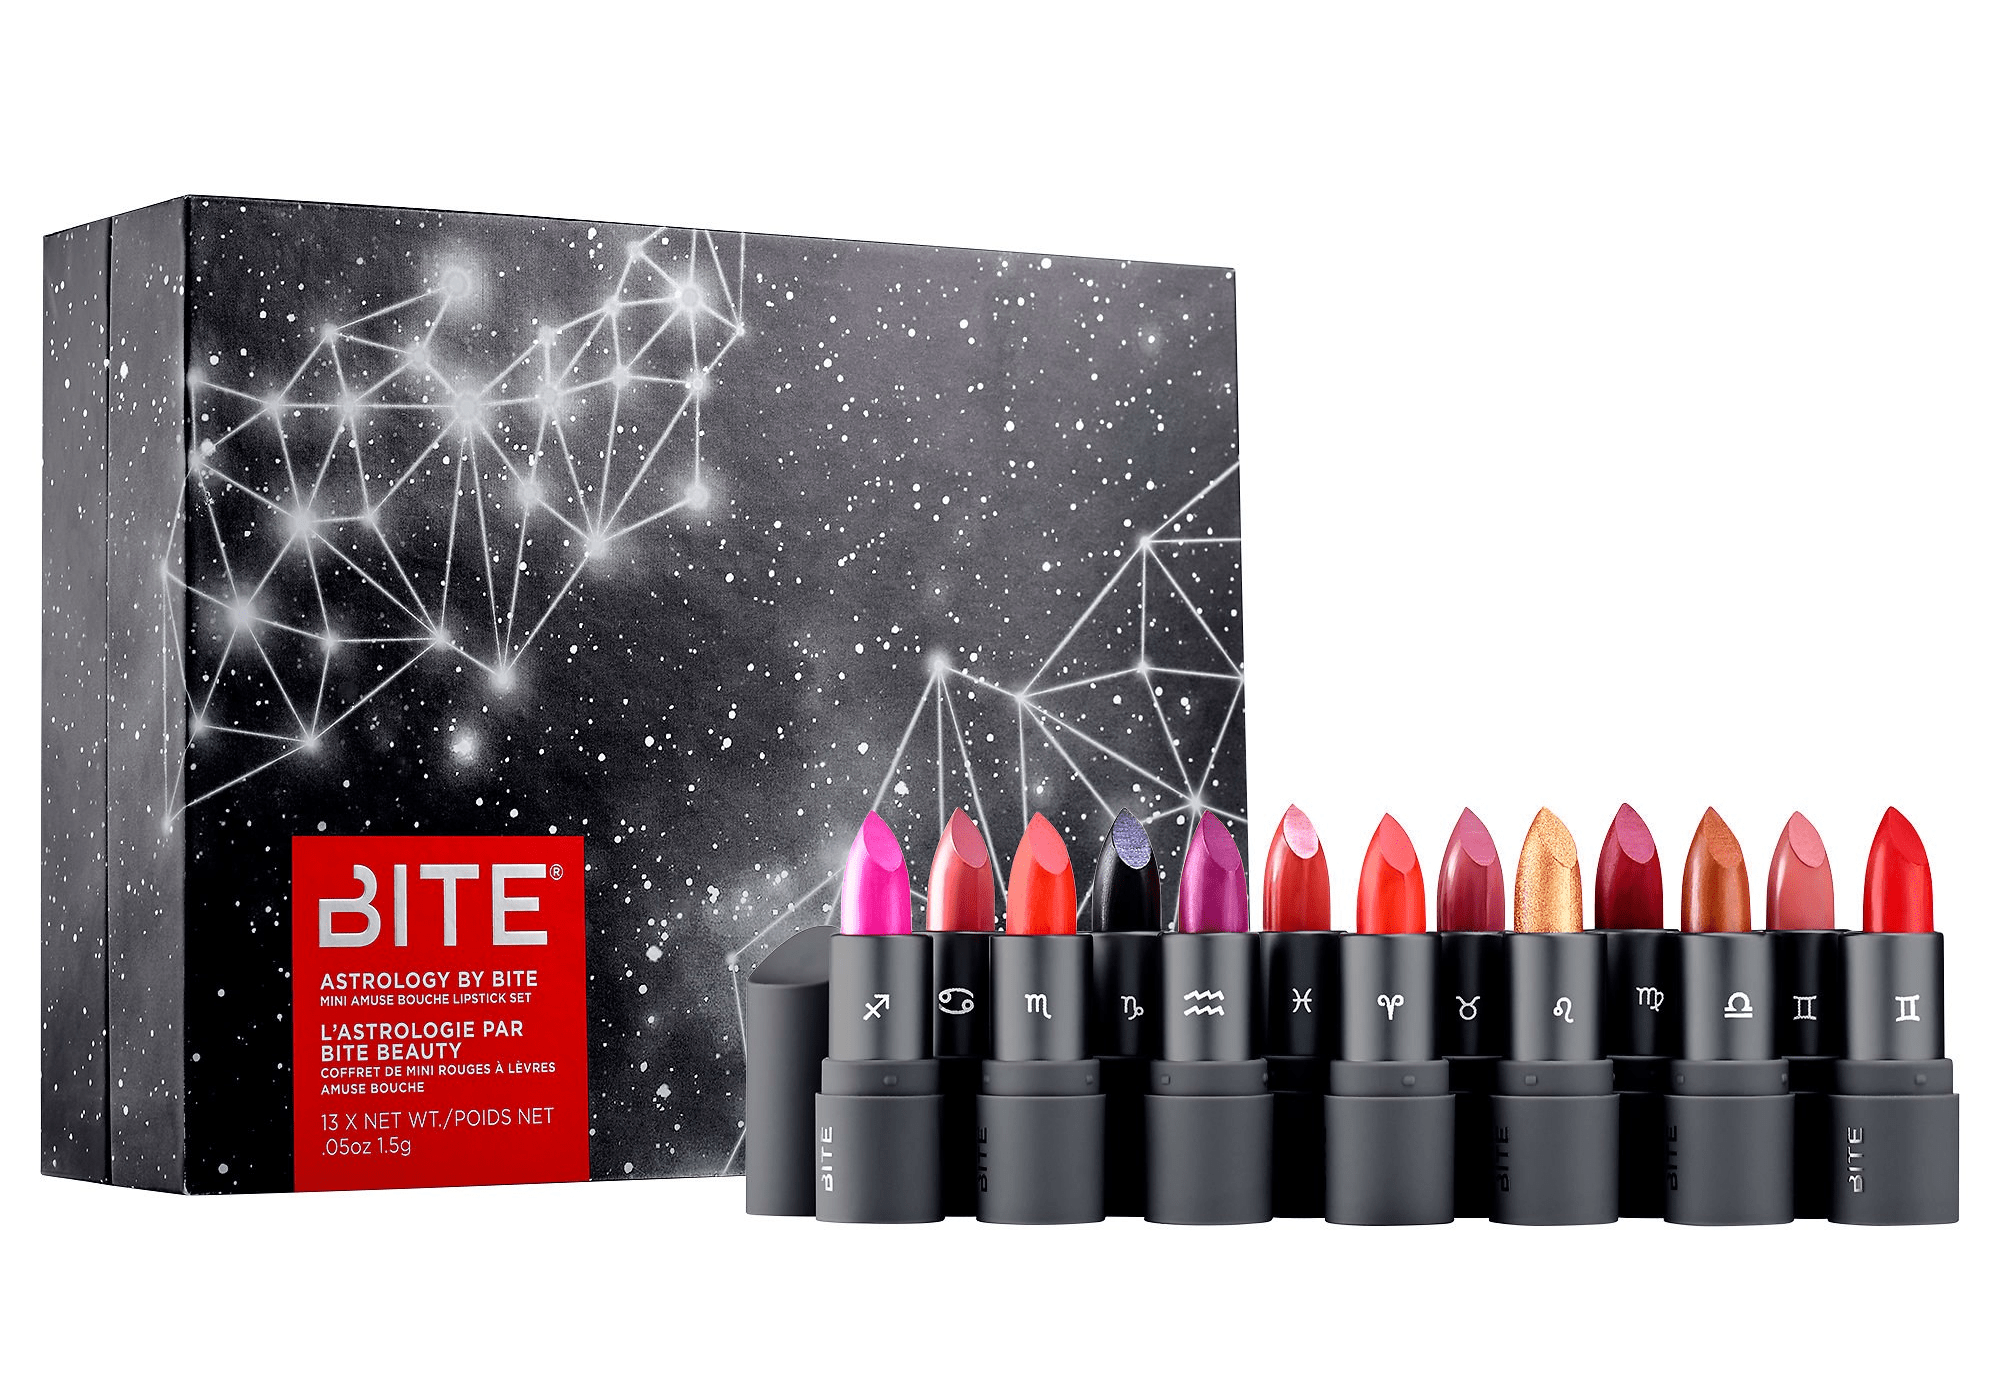 2018 Astrology By Bite Beauty "Advent Calendar" Available Now + Full